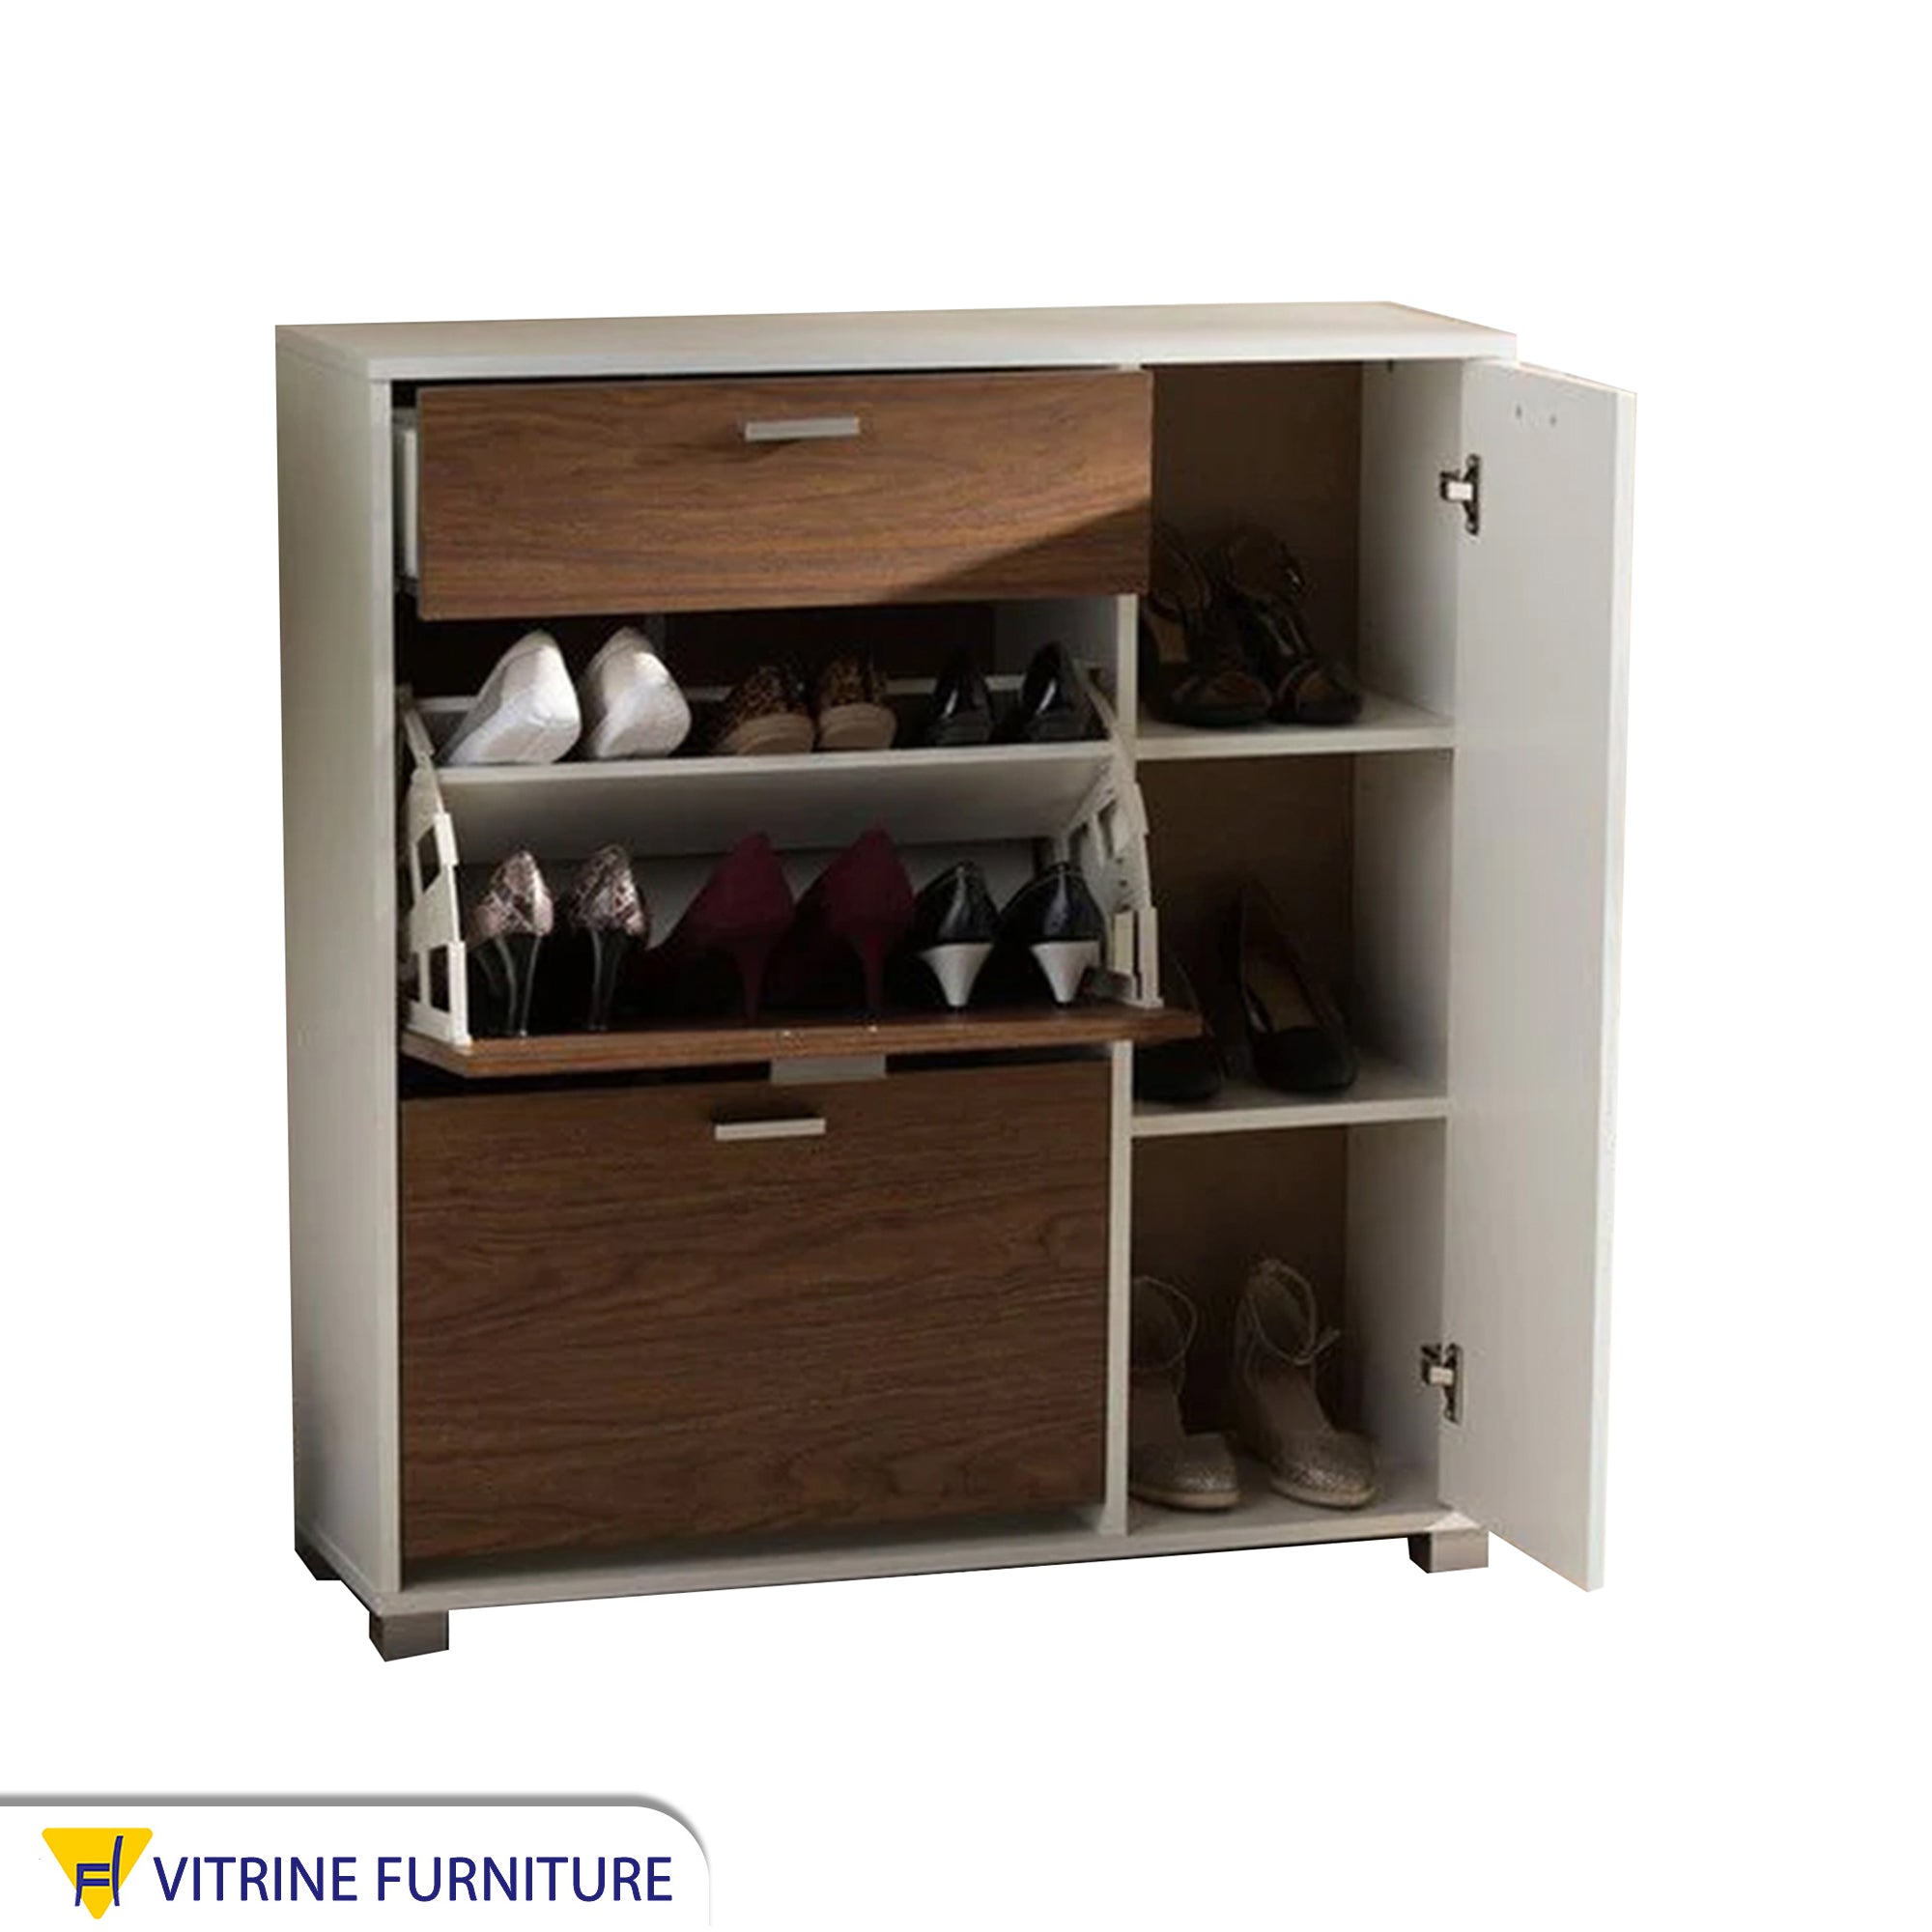 A Shoe rack with multiple storage spaces